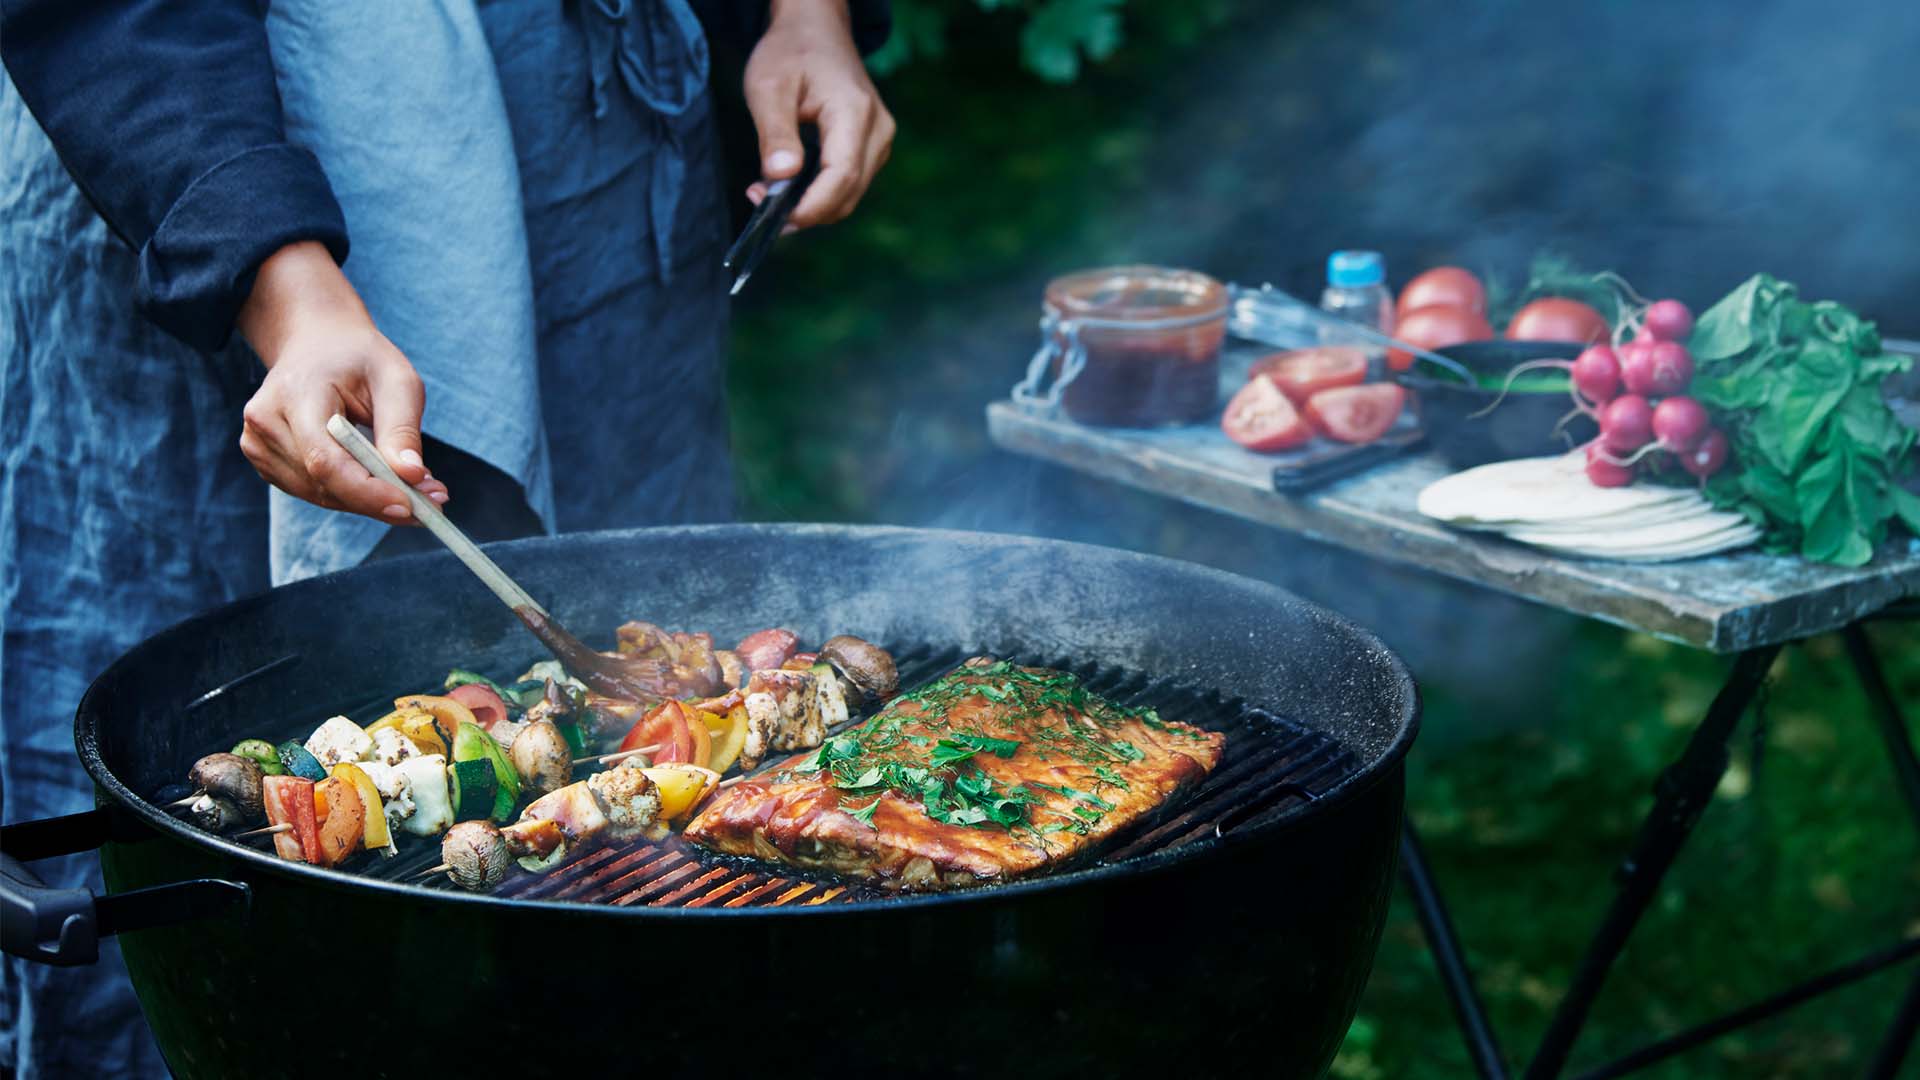 People have rediscovered grilled food